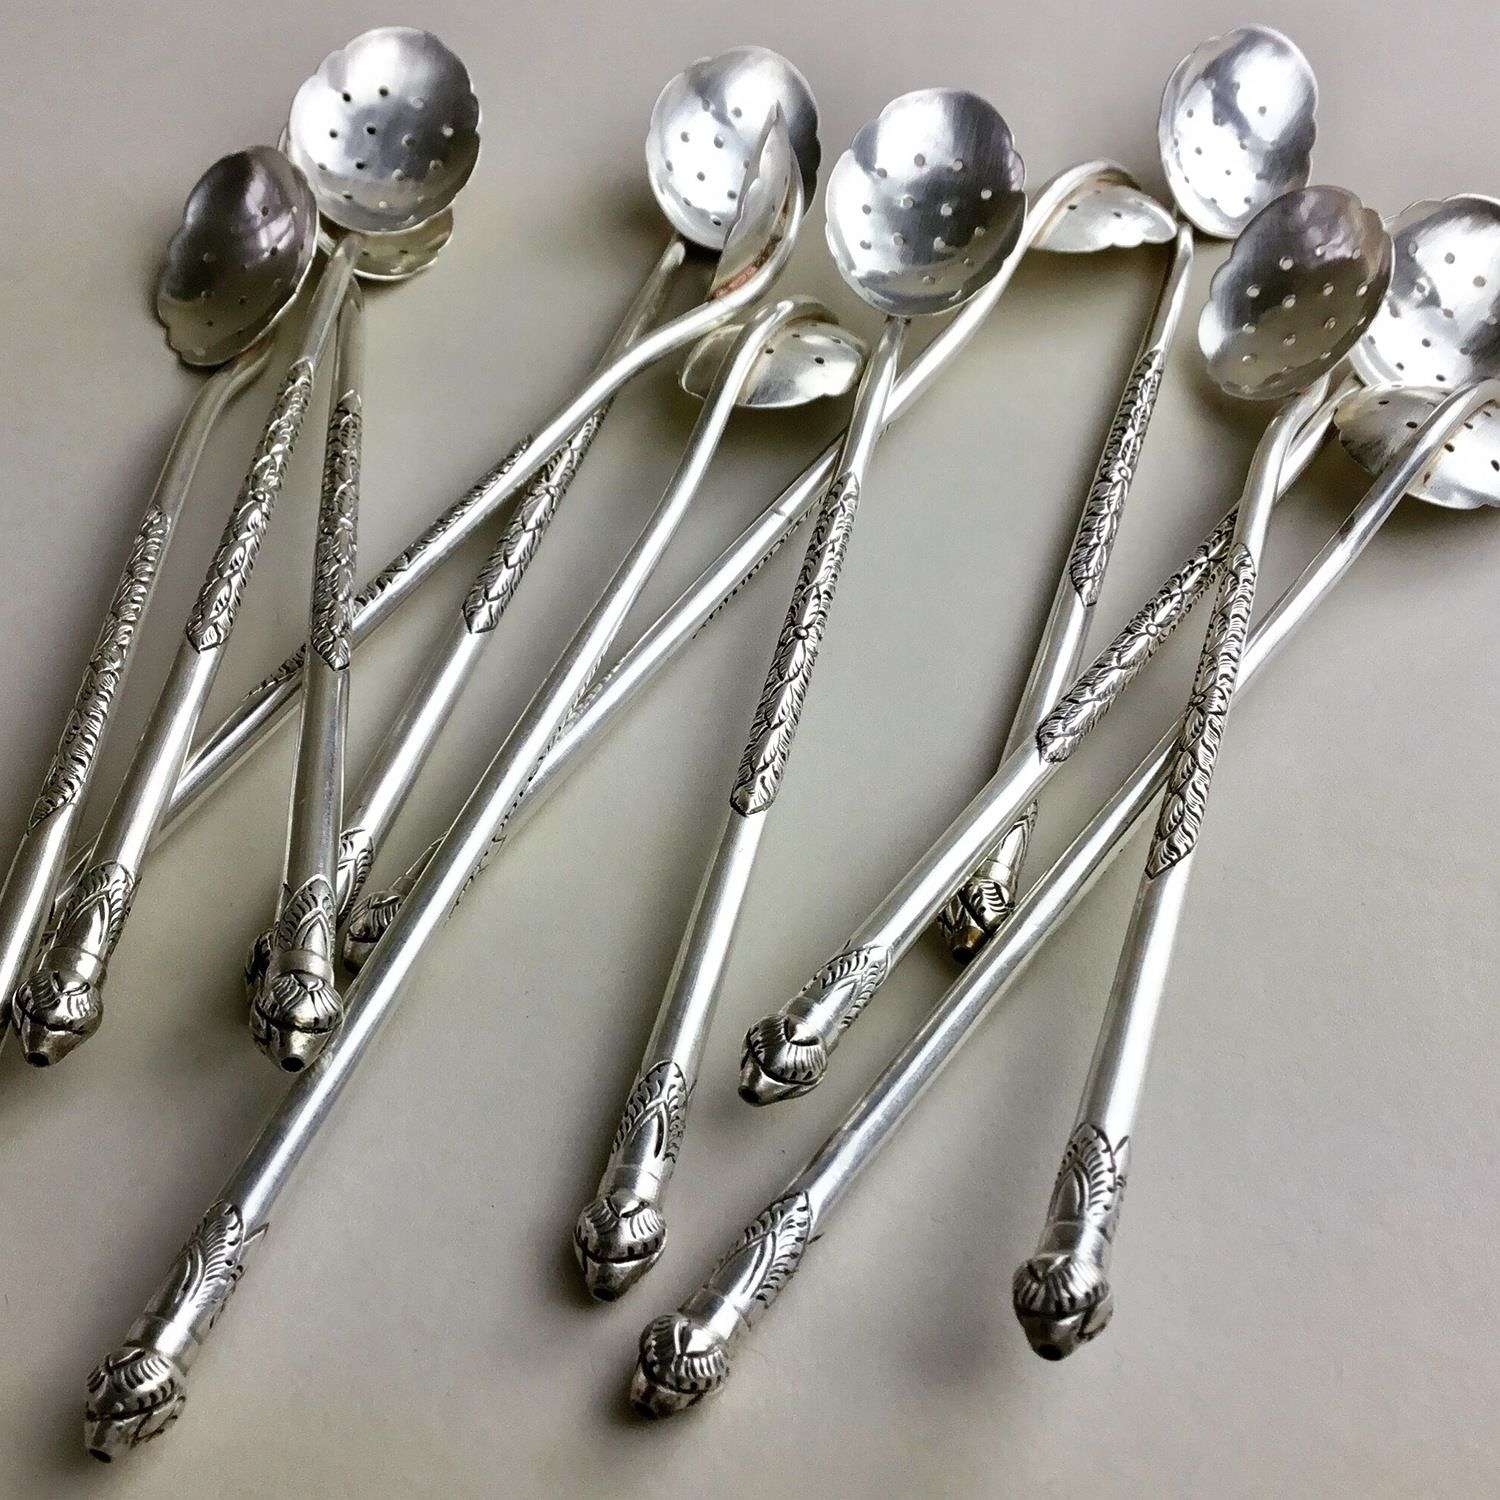 1920s cocktail straw/spoons